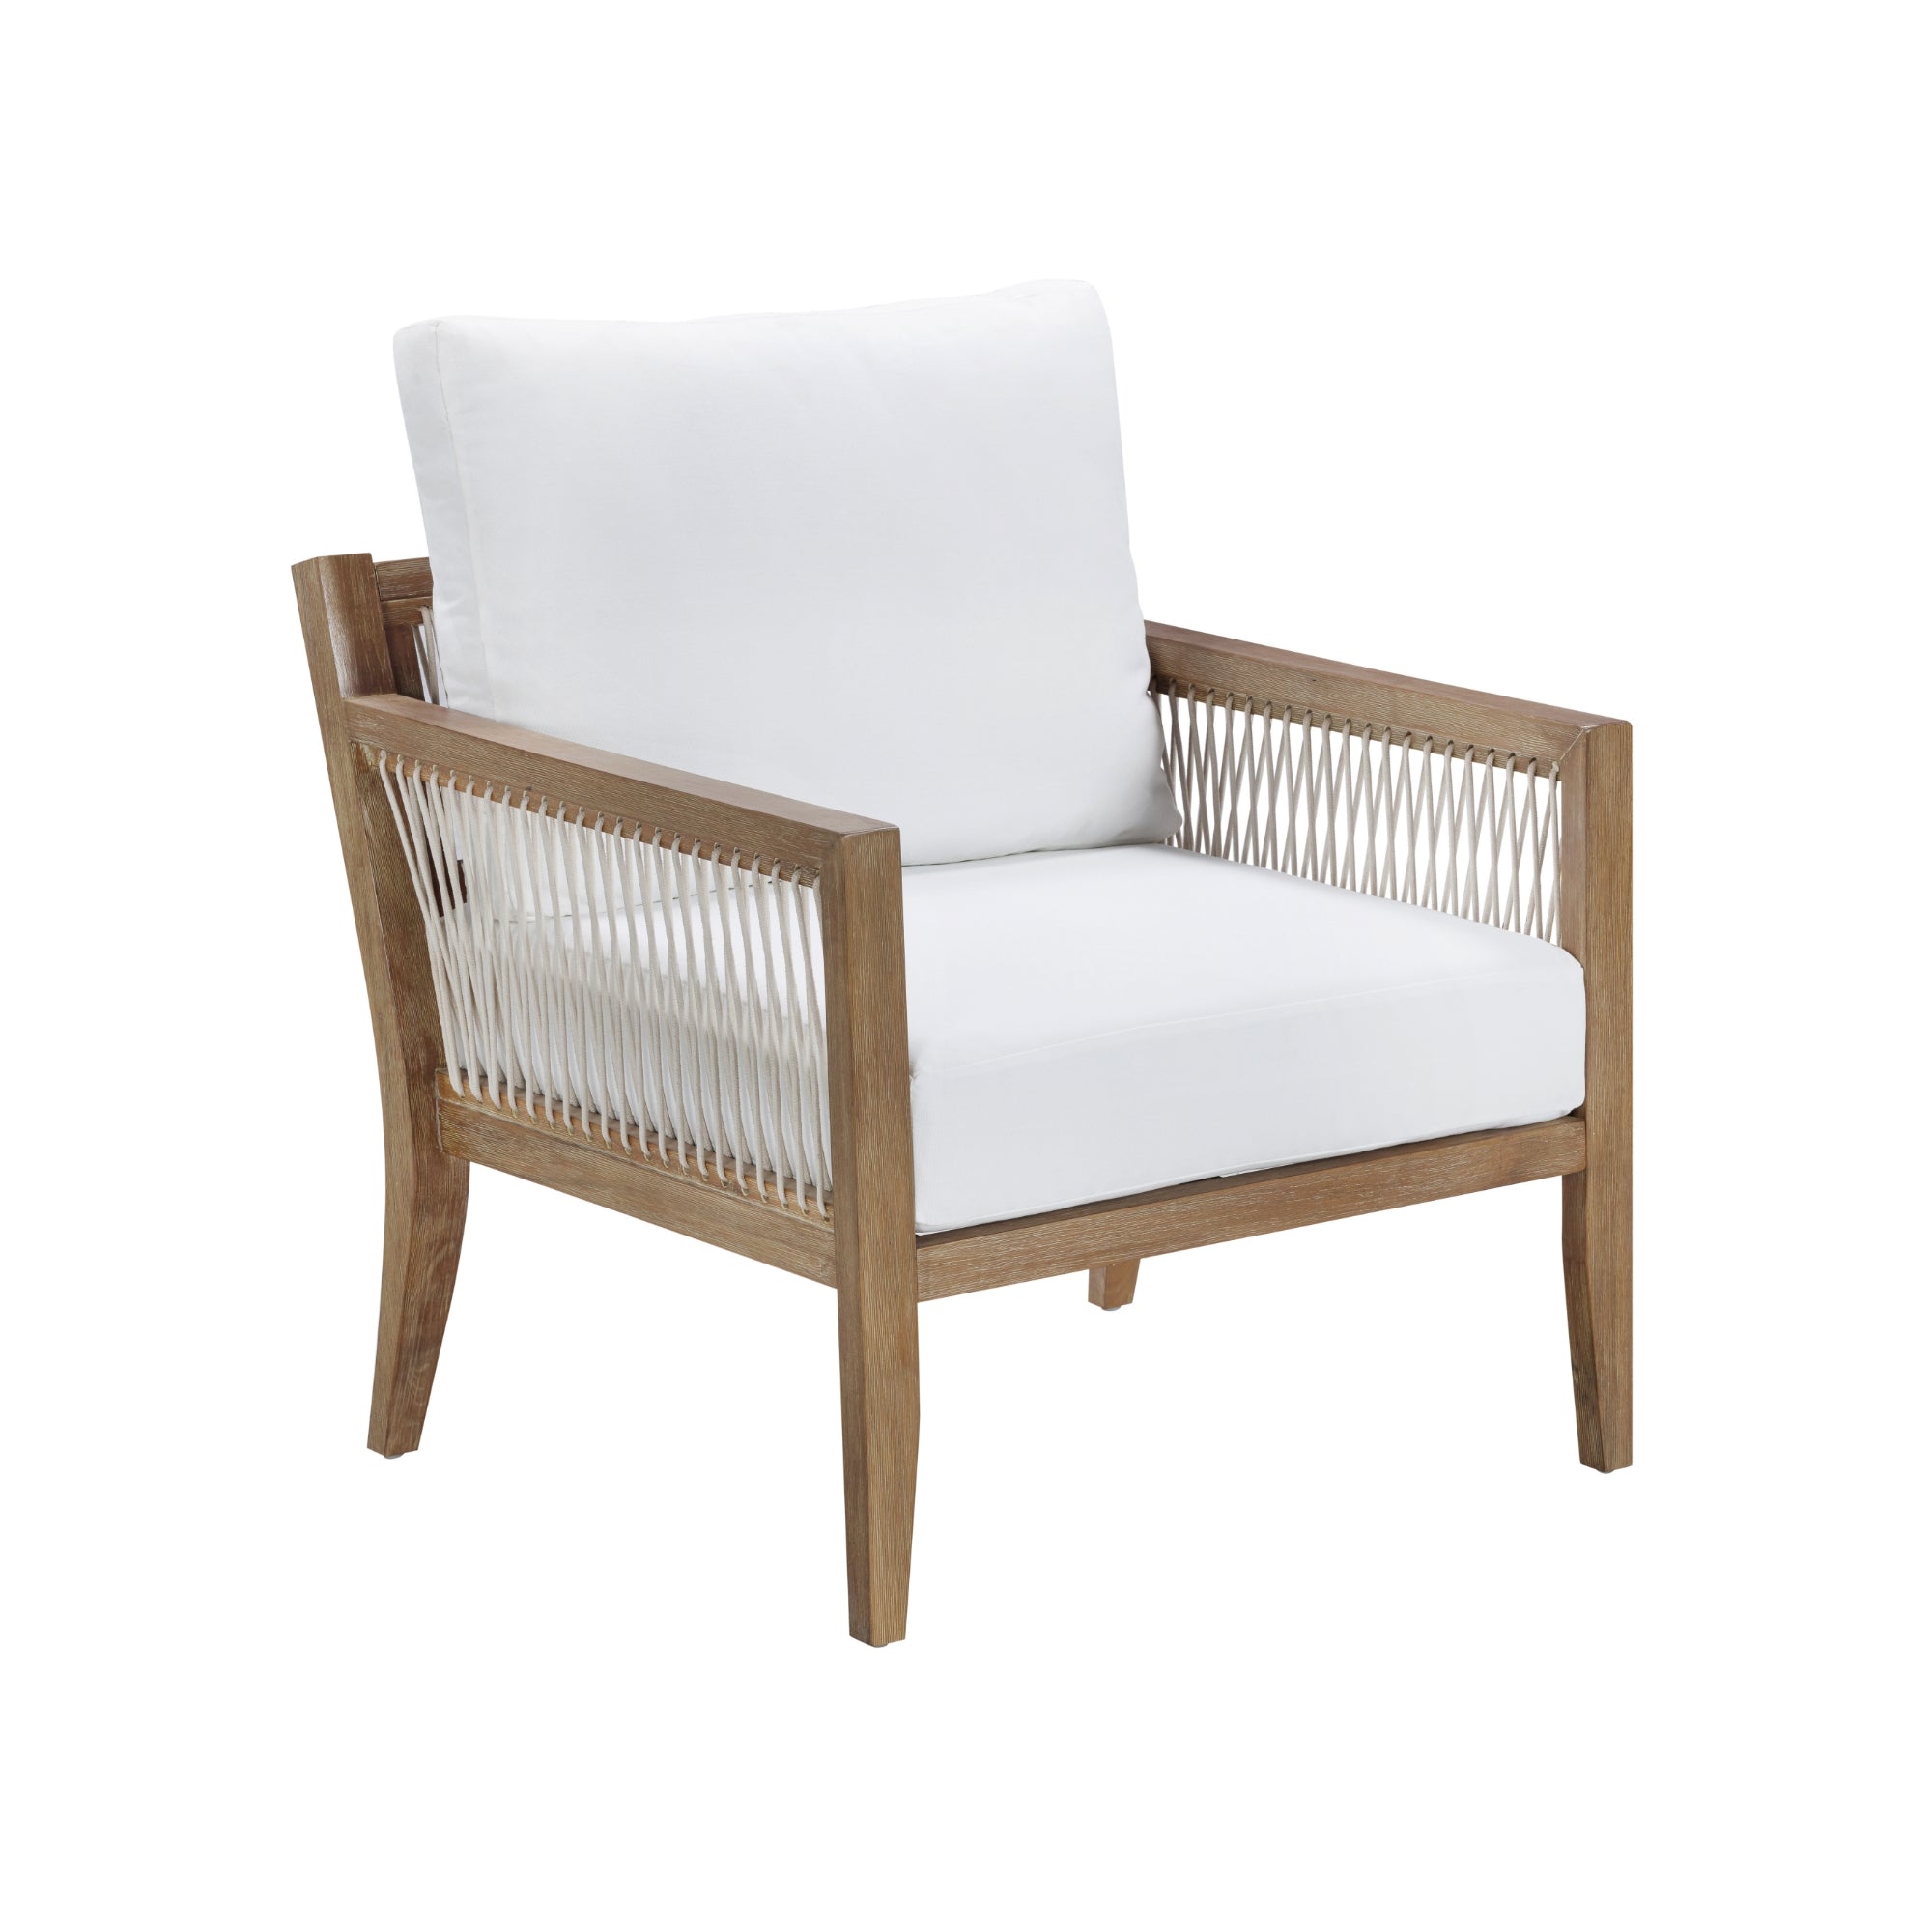 Outdoor Patio Arm Chair White Light Brown